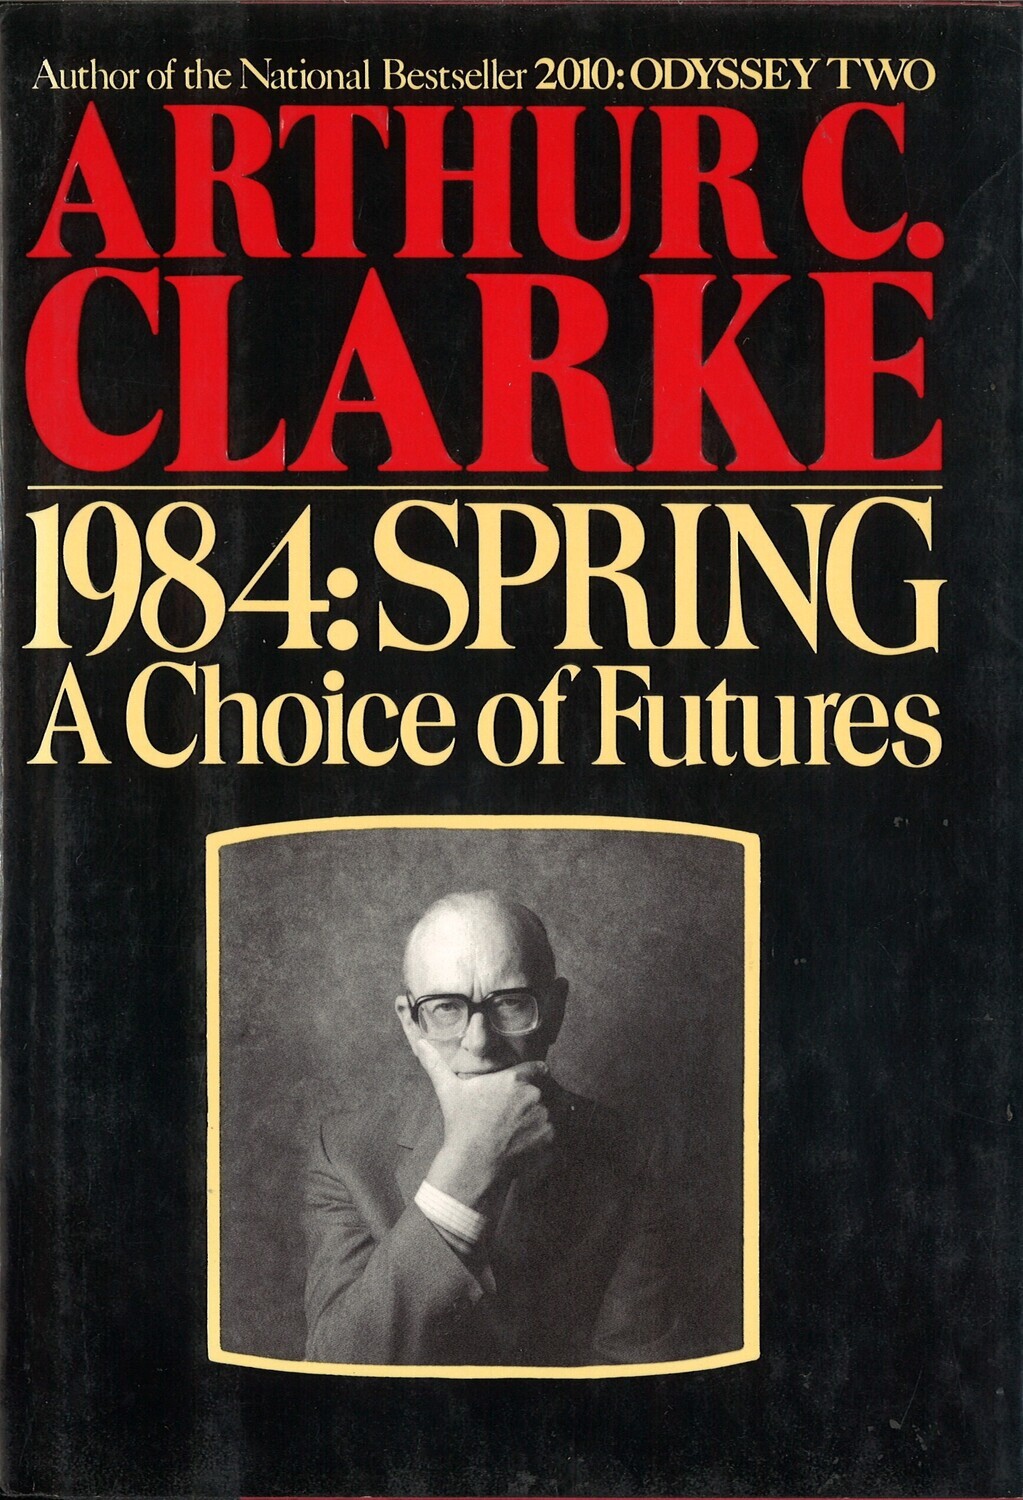 1984: SPRING A Choice of Futures